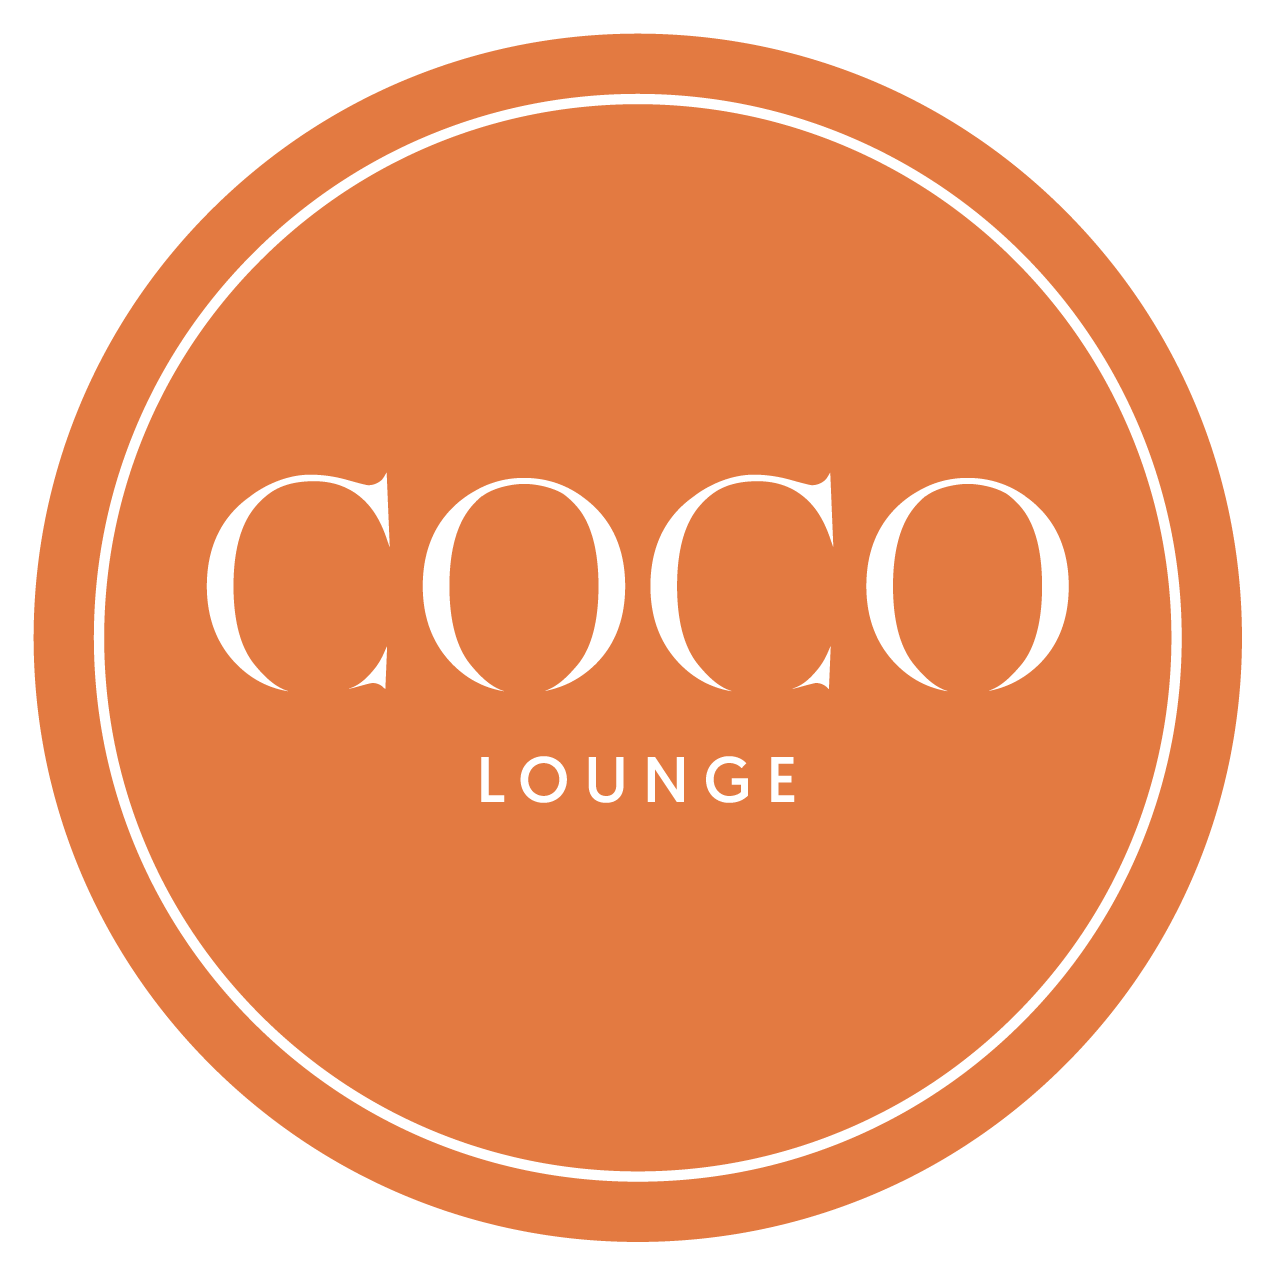 Coco Lounge - Coming Soon in UAE